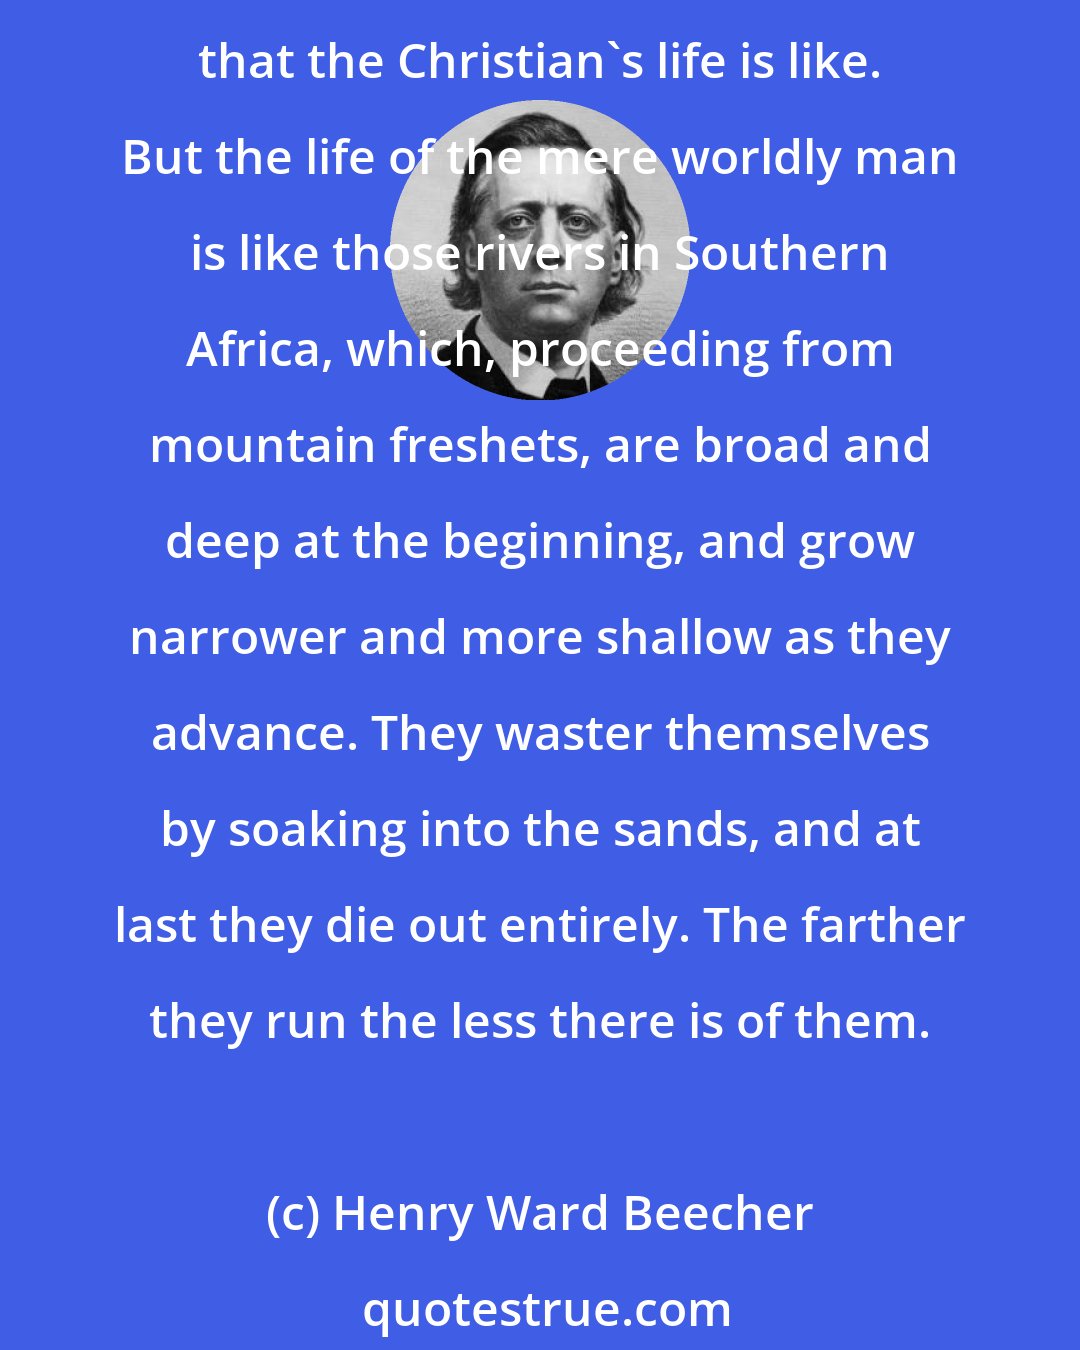 Henry Ward Beecher: Ordinarily rivers run small at the beginning, grow broader and broader as they proceed, and become widest and deepest at the point, where they enter the sea. It is such rivers that the Christian's life is like. But the life of the mere worldly man is like those rivers in Southern Africa, which, proceeding from mountain freshets, are broad and deep at the beginning, and grow narrower and more shallow as they advance. They waster themselves by soaking into the sands, and at last they die out entirely. The farther they run the less there is of them.